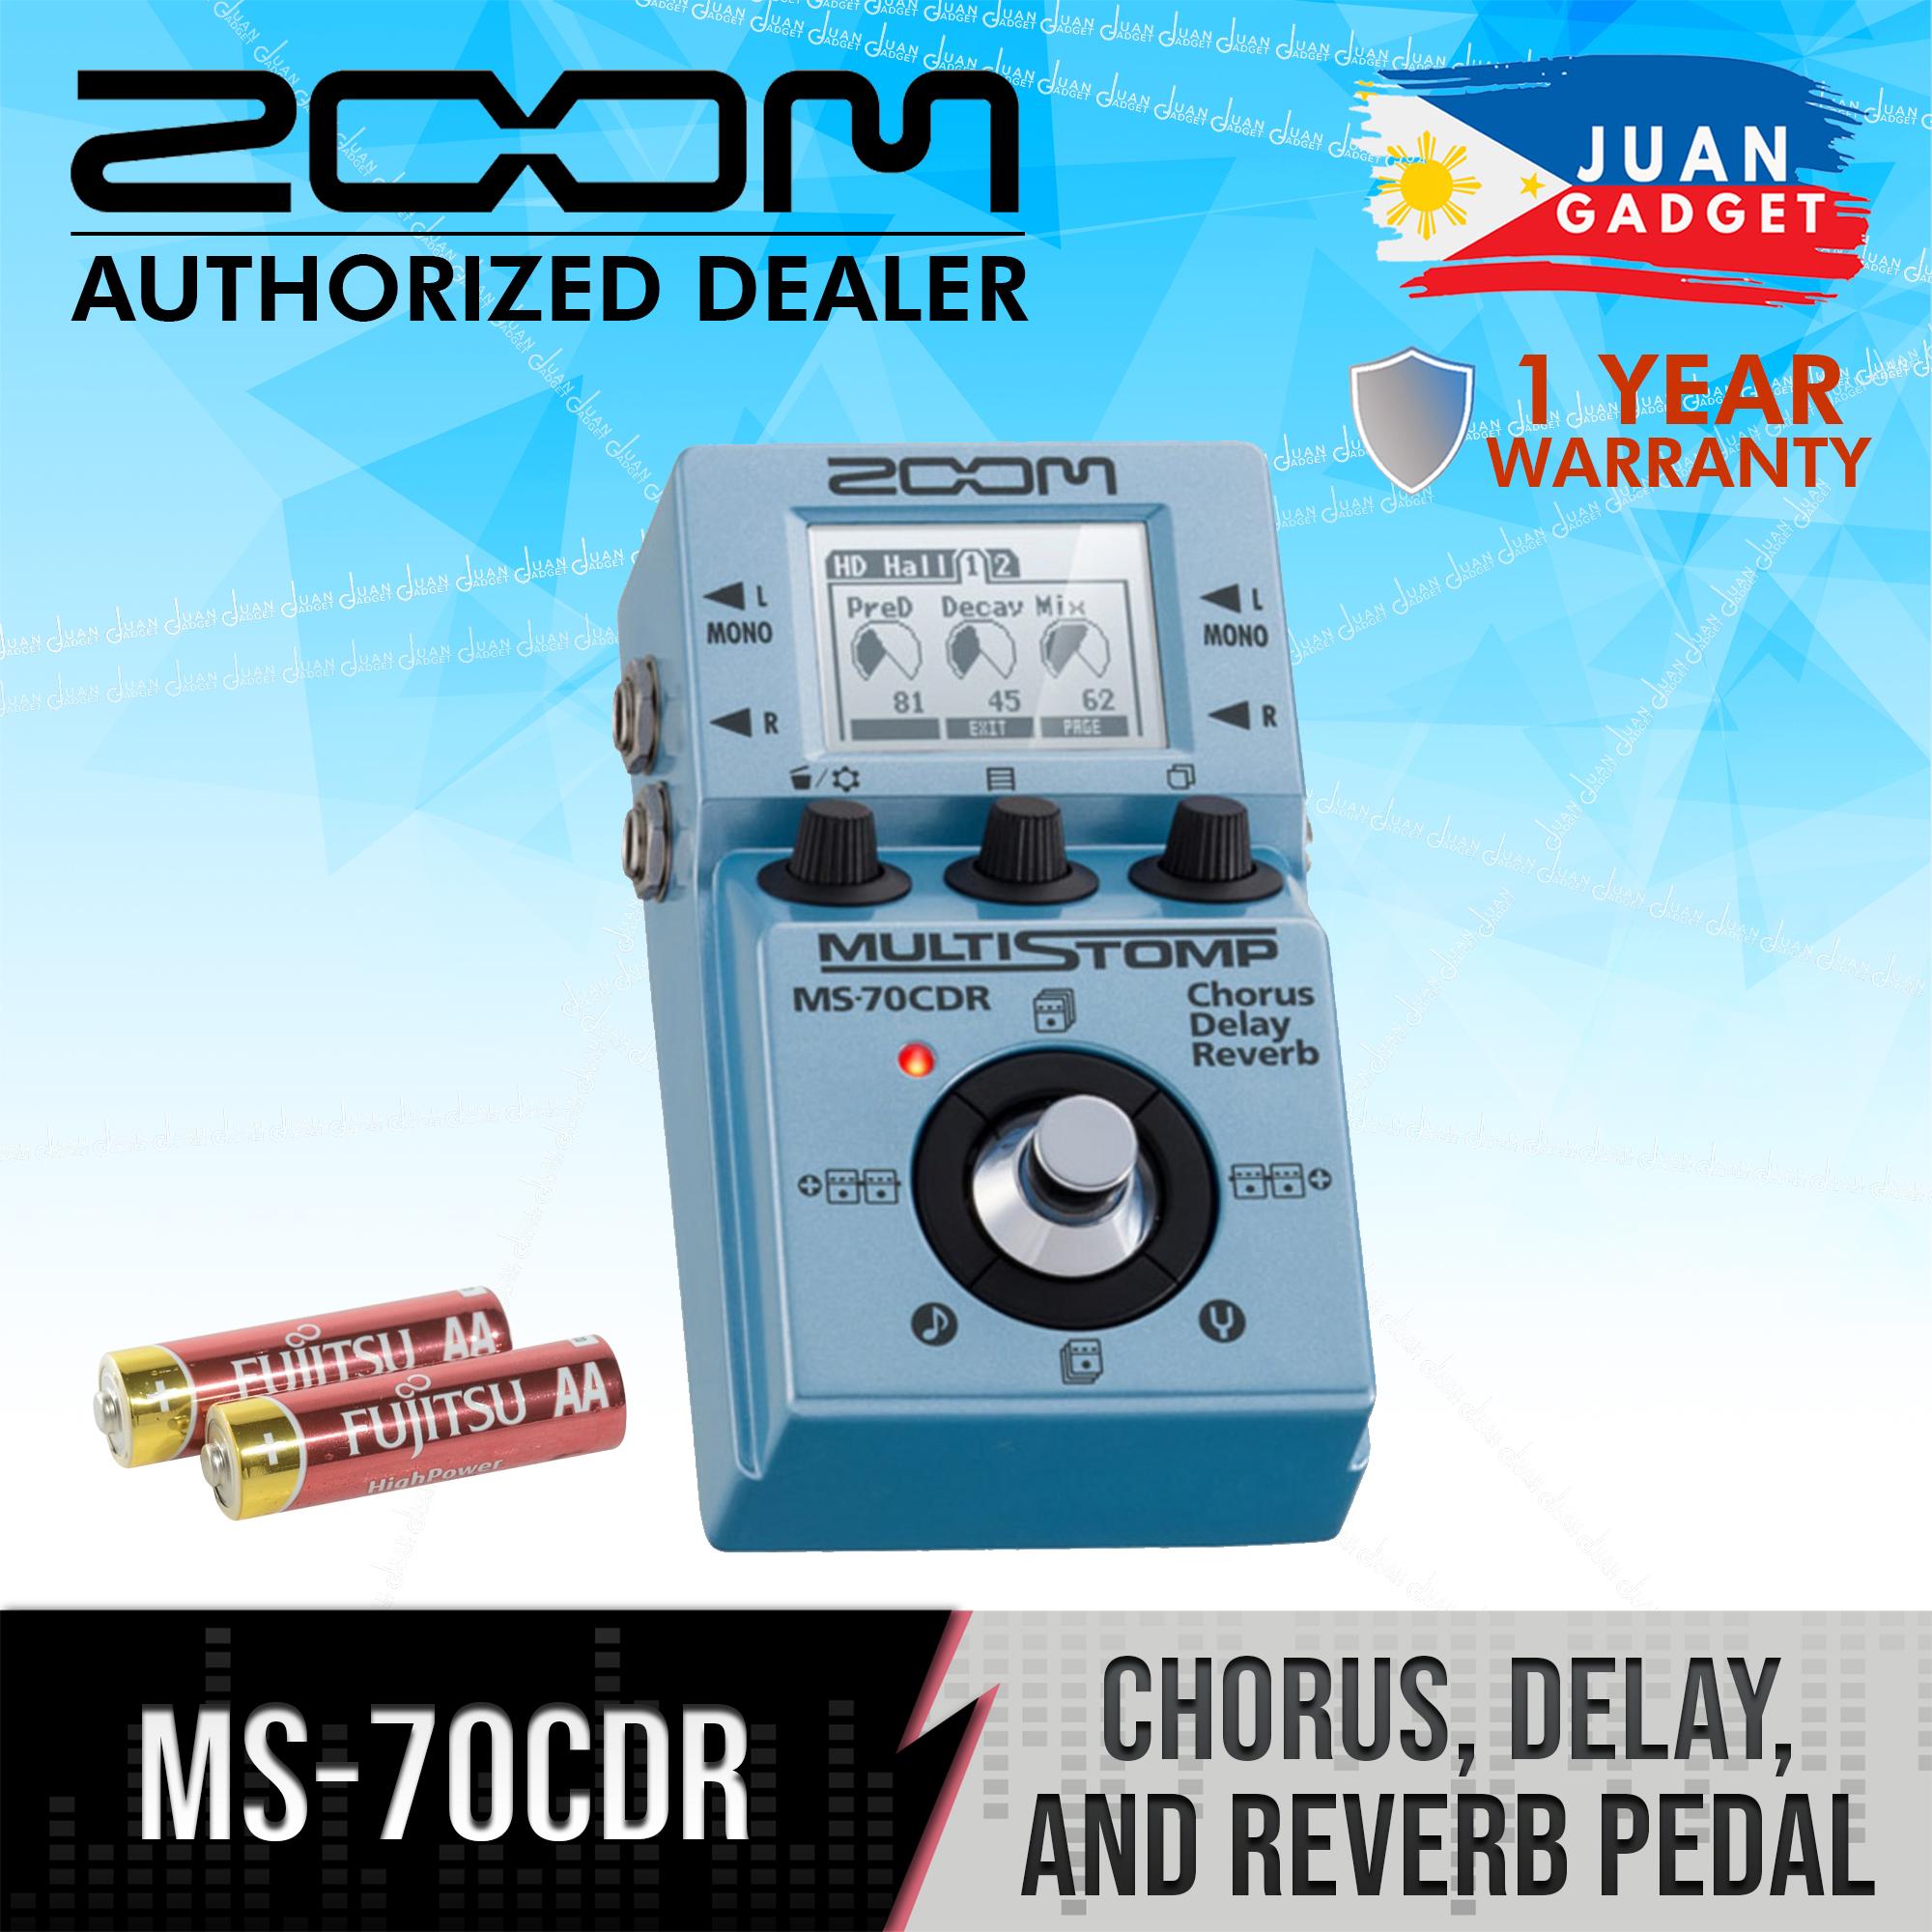 Zoom MS-70CDR Multi-Stomp Chorus/Delay/Reverb Guitar Effects Pedal